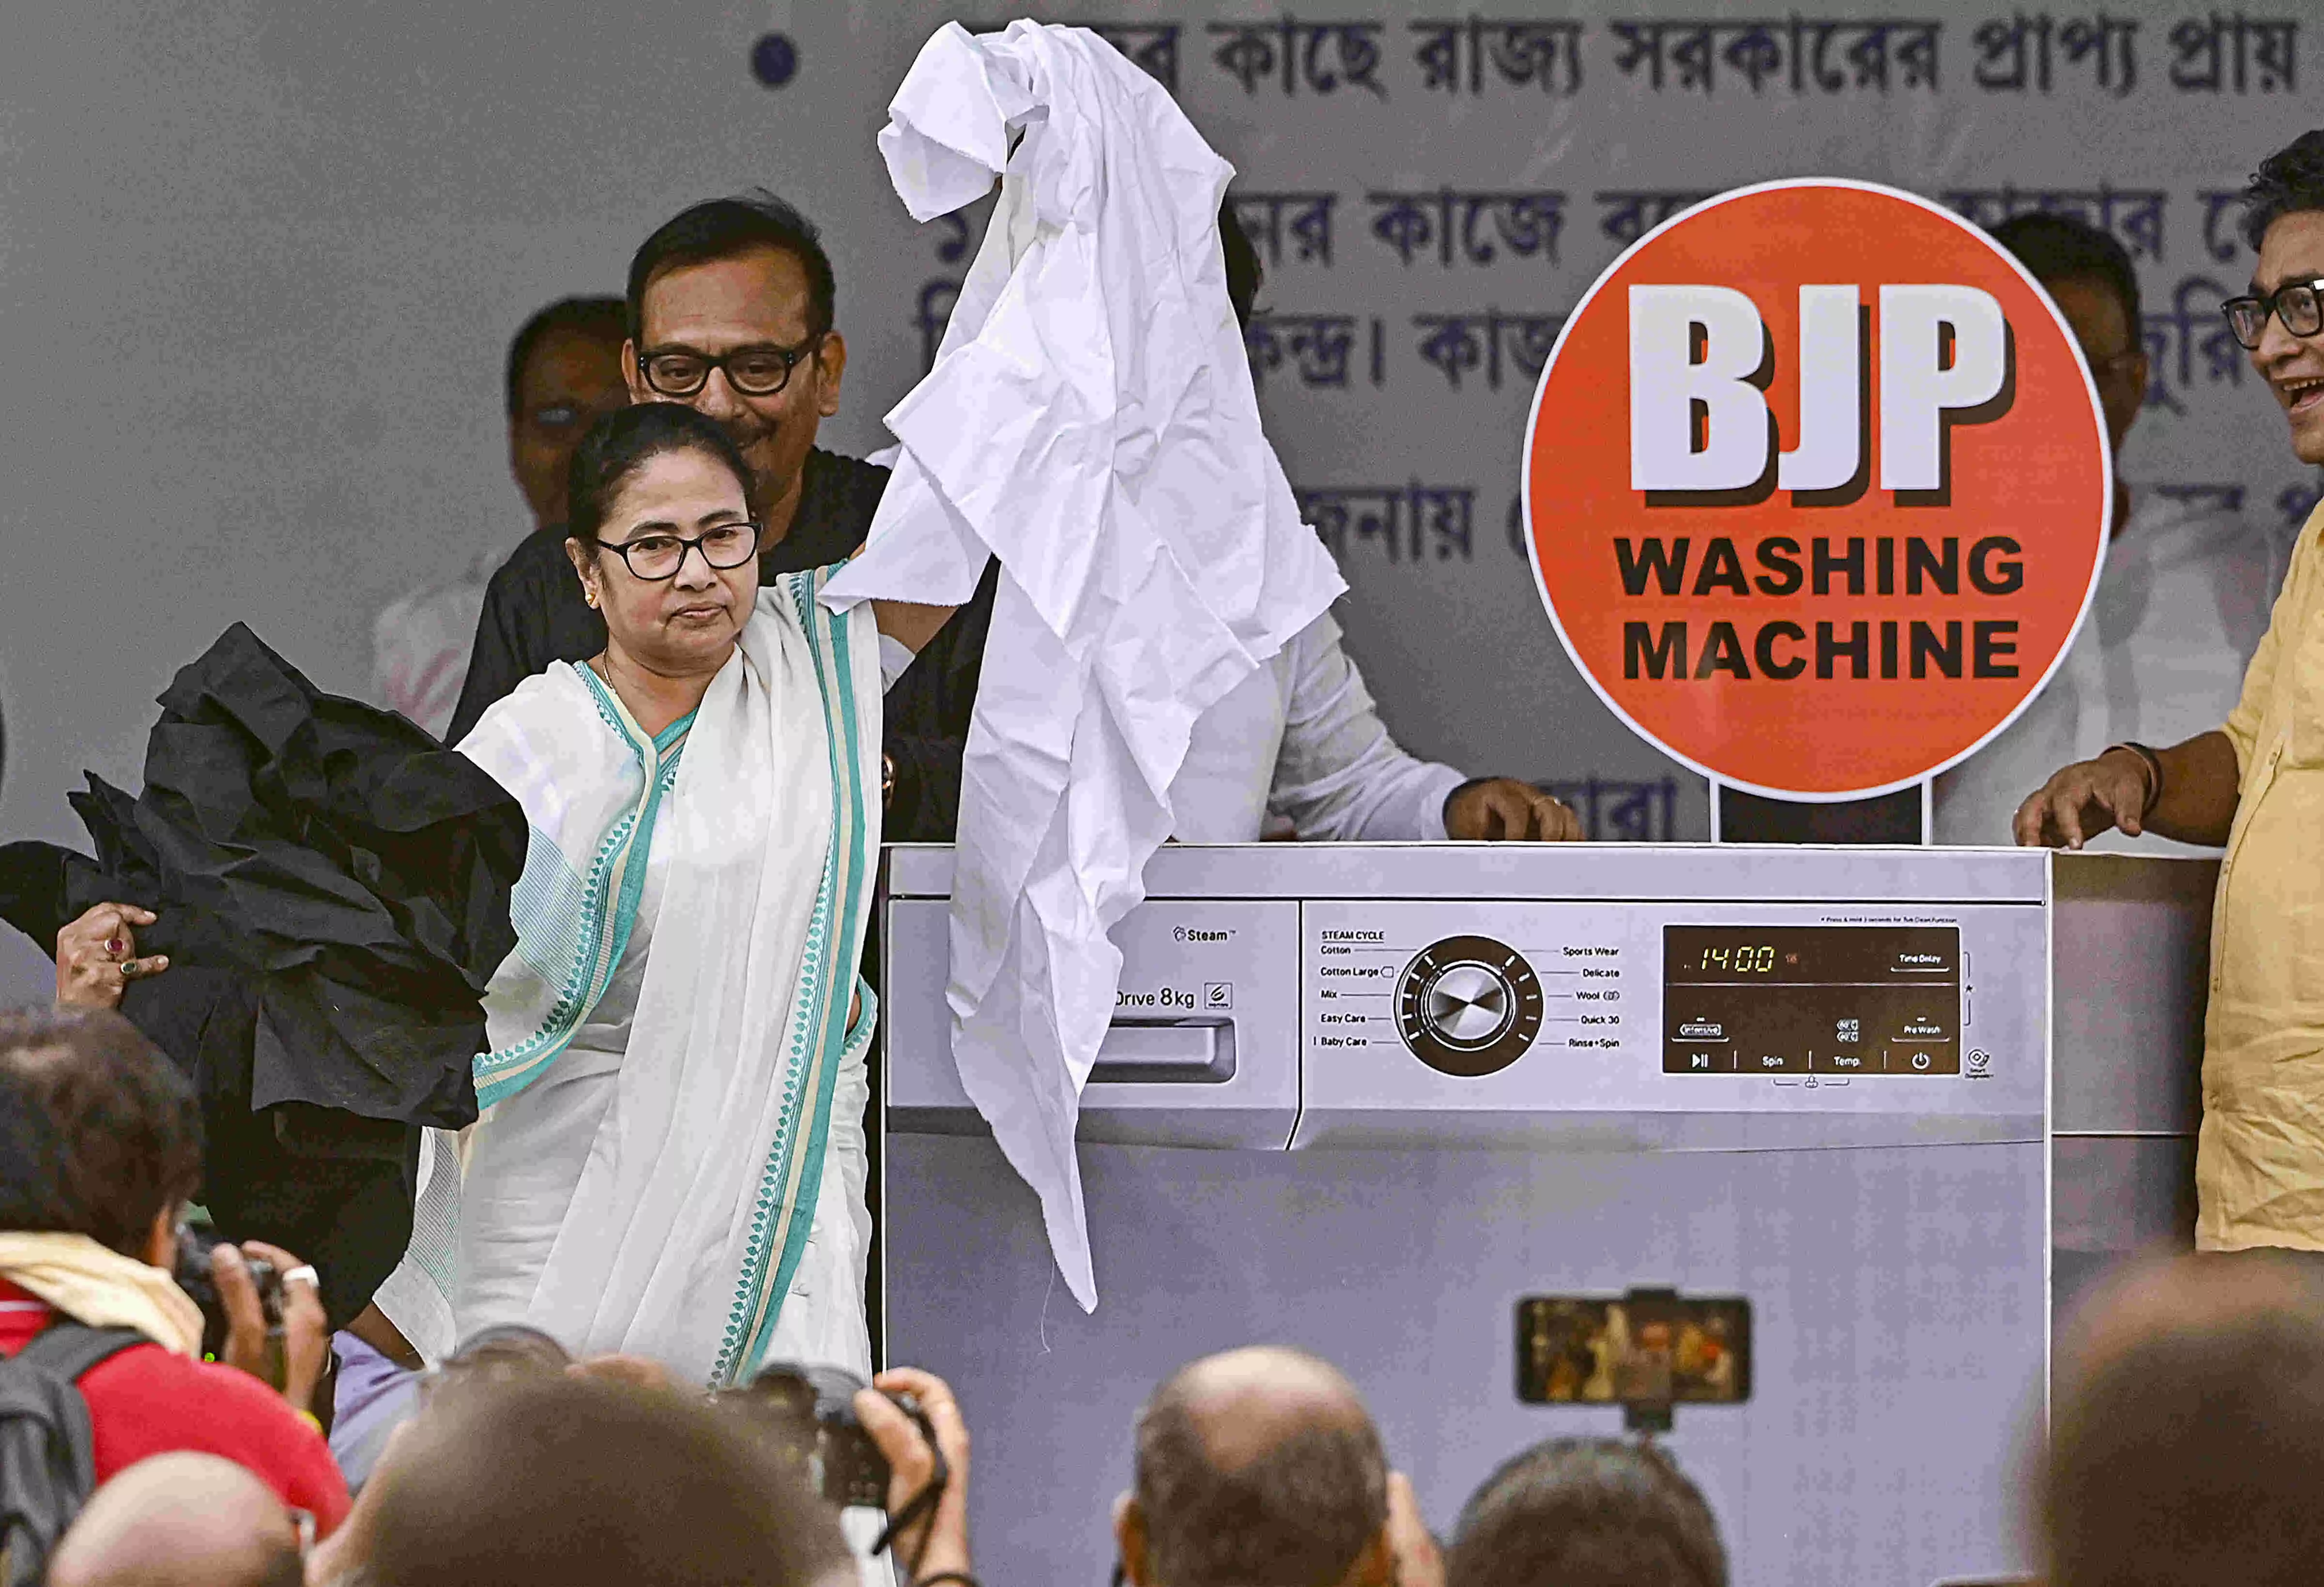 Mamata Banerjee sits overnight in dharna against Centre, raises political temperature